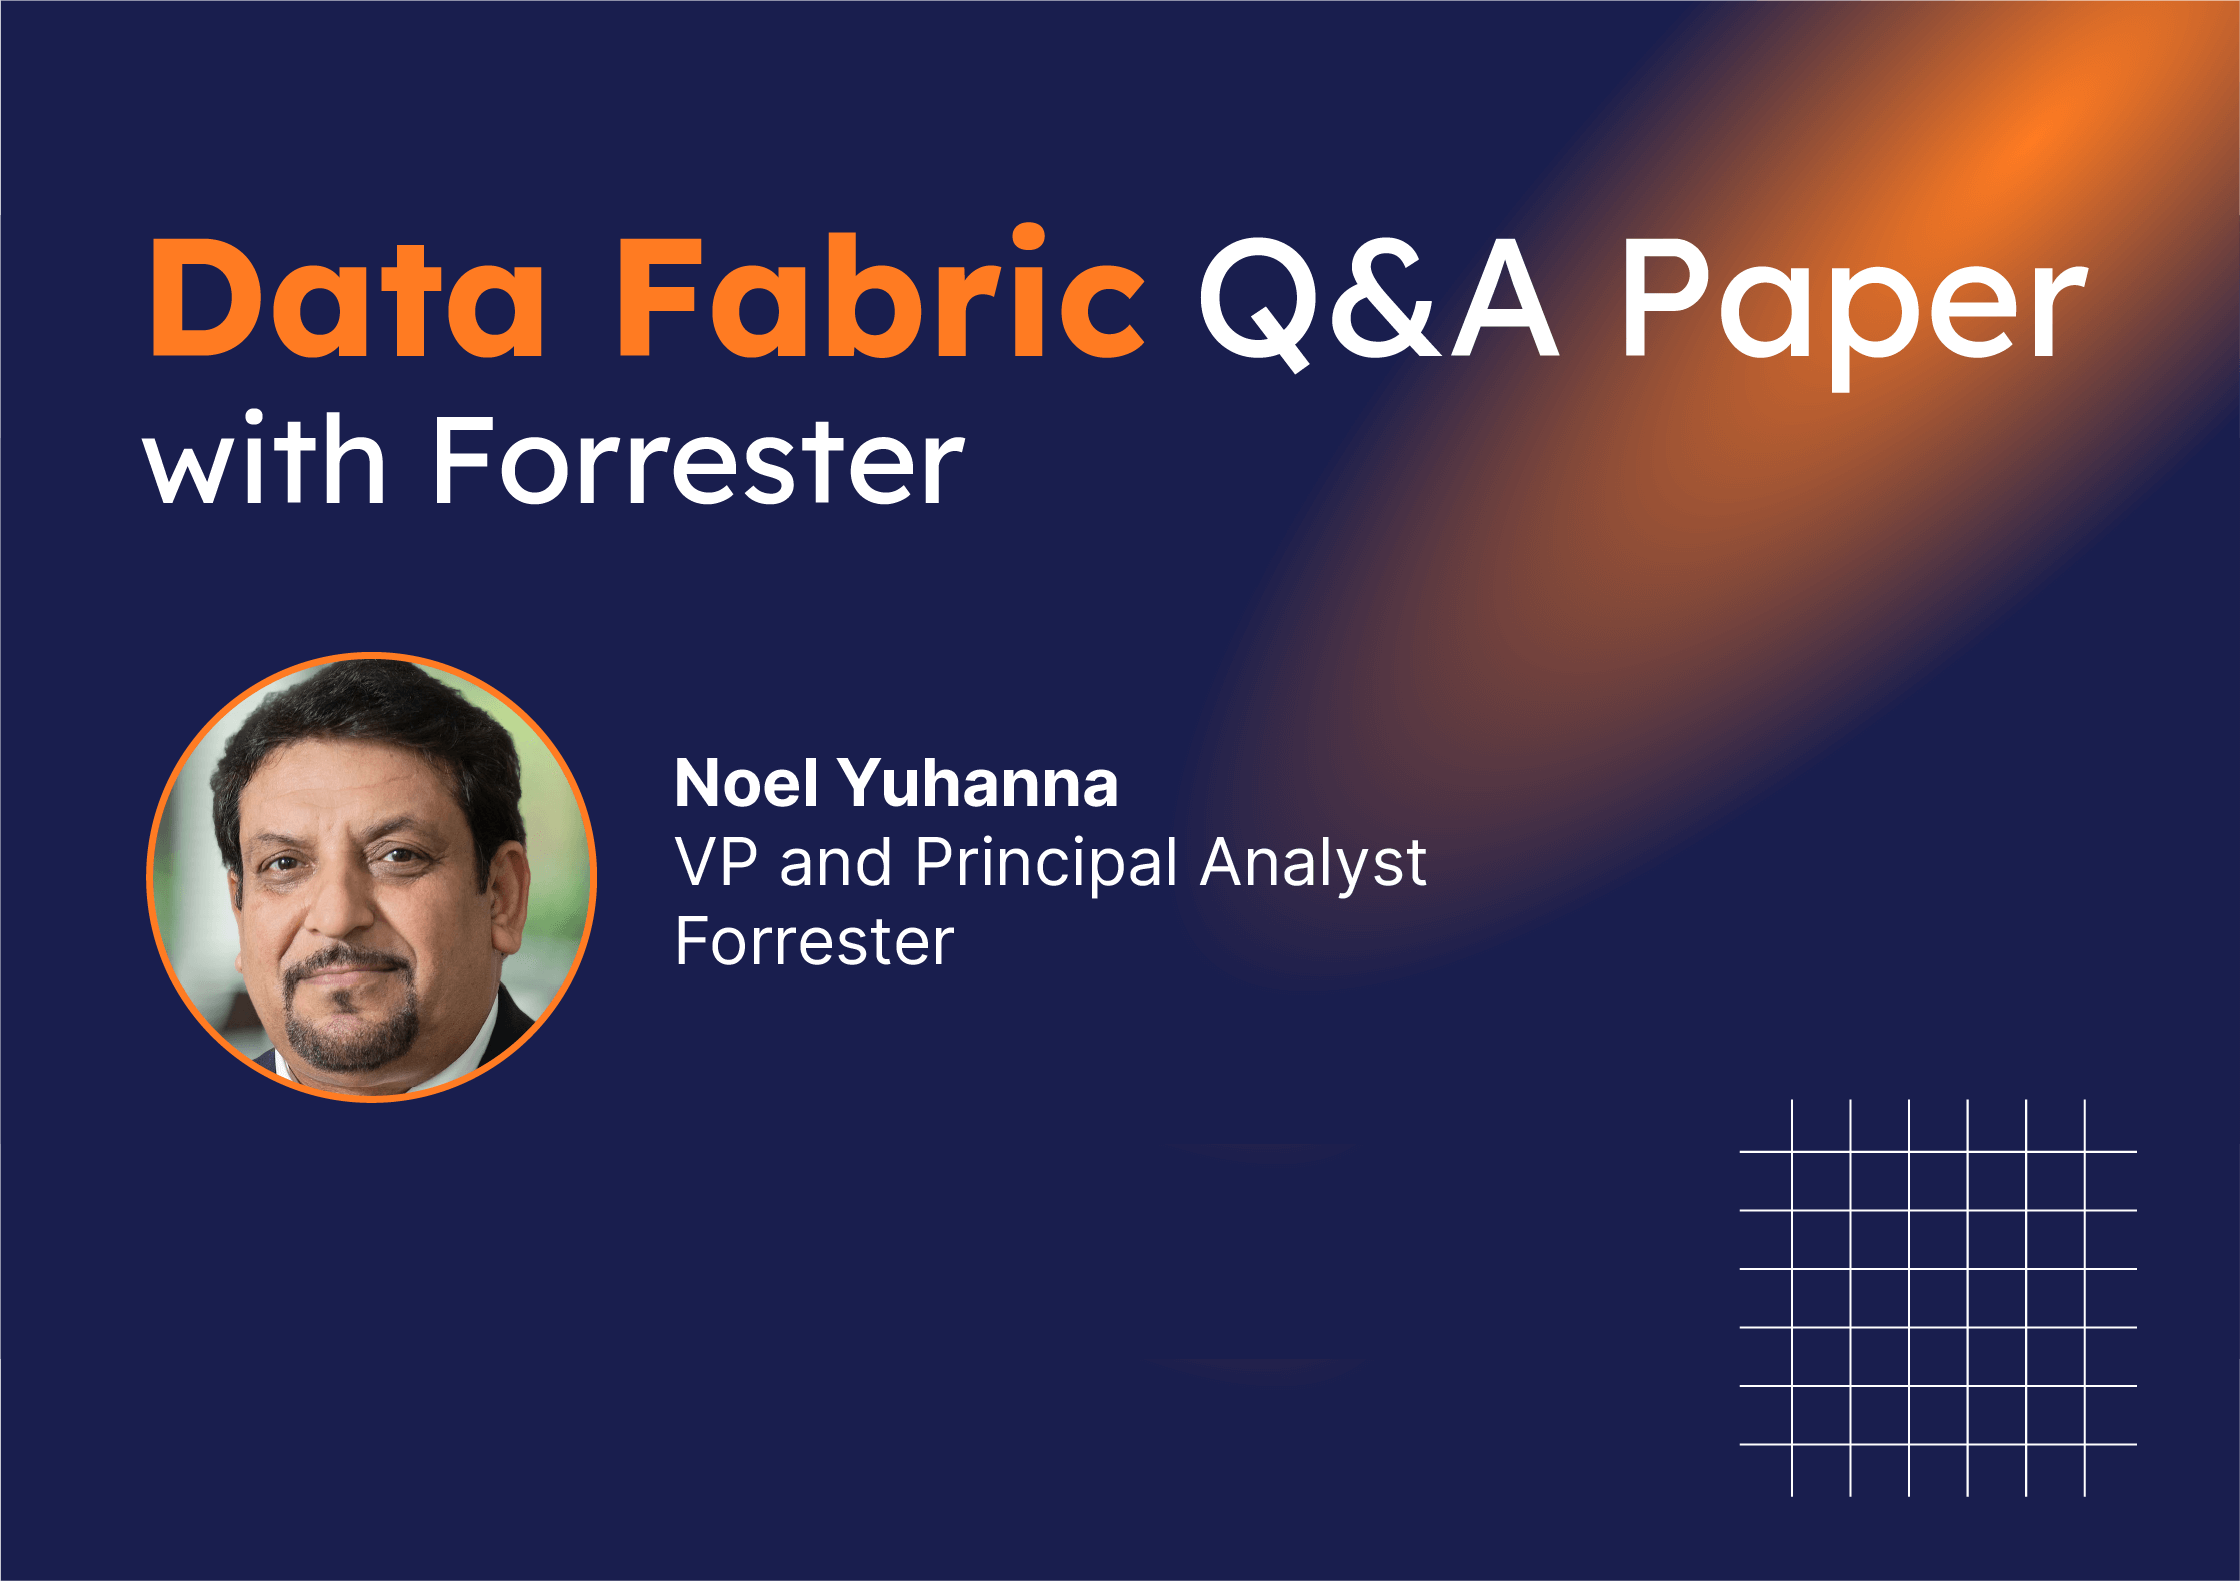 Data Fabric Q&A Paper with Forrester